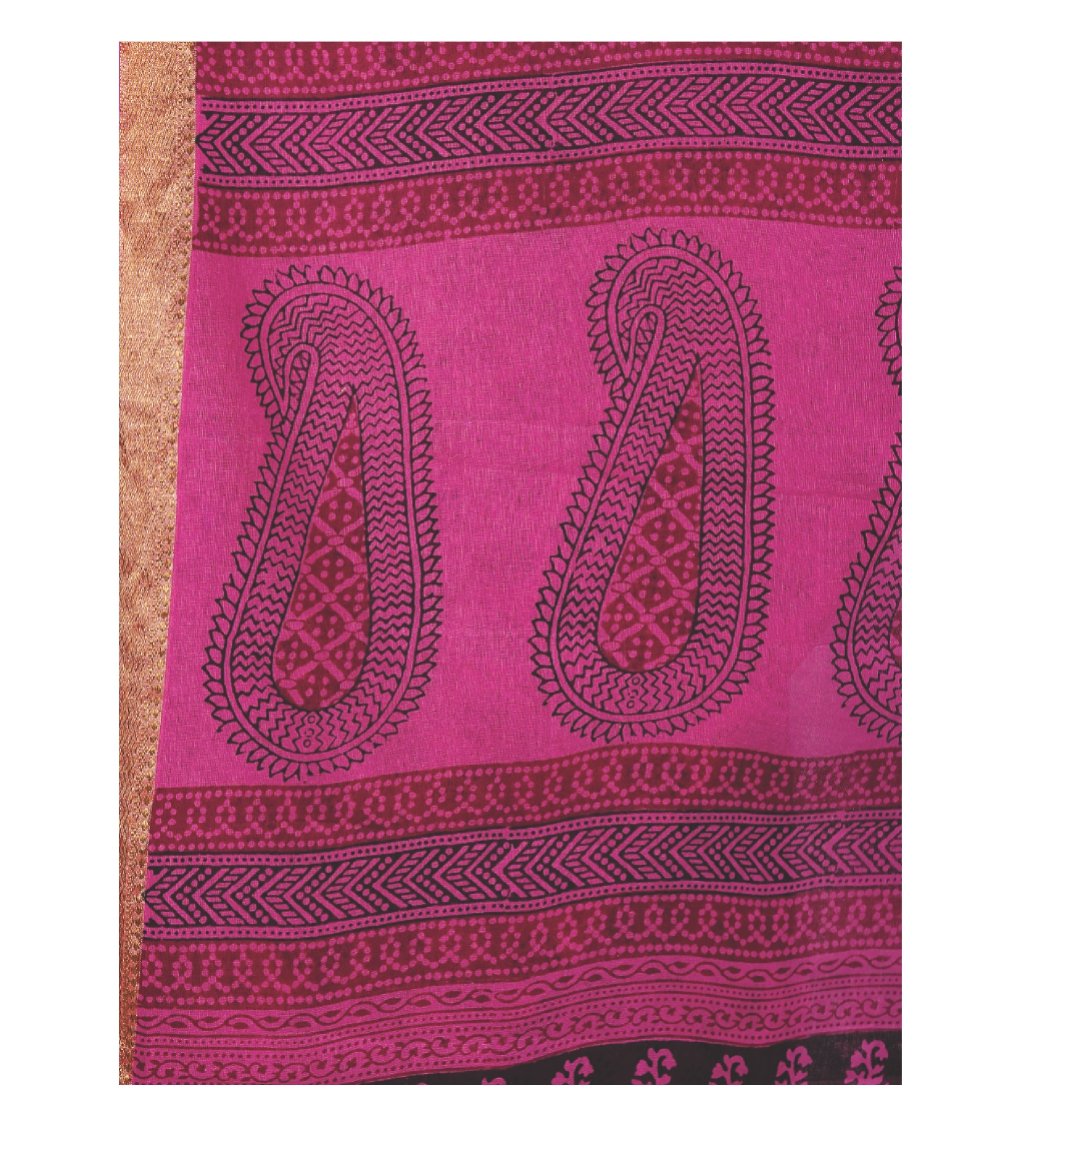 Magenta Cotton Hand Block Bagh Print Handcrafted Saree-Saree-Kalakari India-ZIBASA0047-Bagh, Cotton, Geographical Indication, Hand Blocks, Hand Crafted, Heritage Prints, Natural Dyes, Sarees, Sustainable Fabrics-[Linen,Ethnic,wear,Fashionista,Handloom,Handicraft,Indigo,blockprint,block,print,Cotton,Chanderi,Blue, latest,classy,party,bollywood,trendy,summer,style,traditional,formal,elegant,unique,style,hand,block,print, dabu,booti,gift,present,glamorous,affordable,collectible,Sari,Saree,printed, 